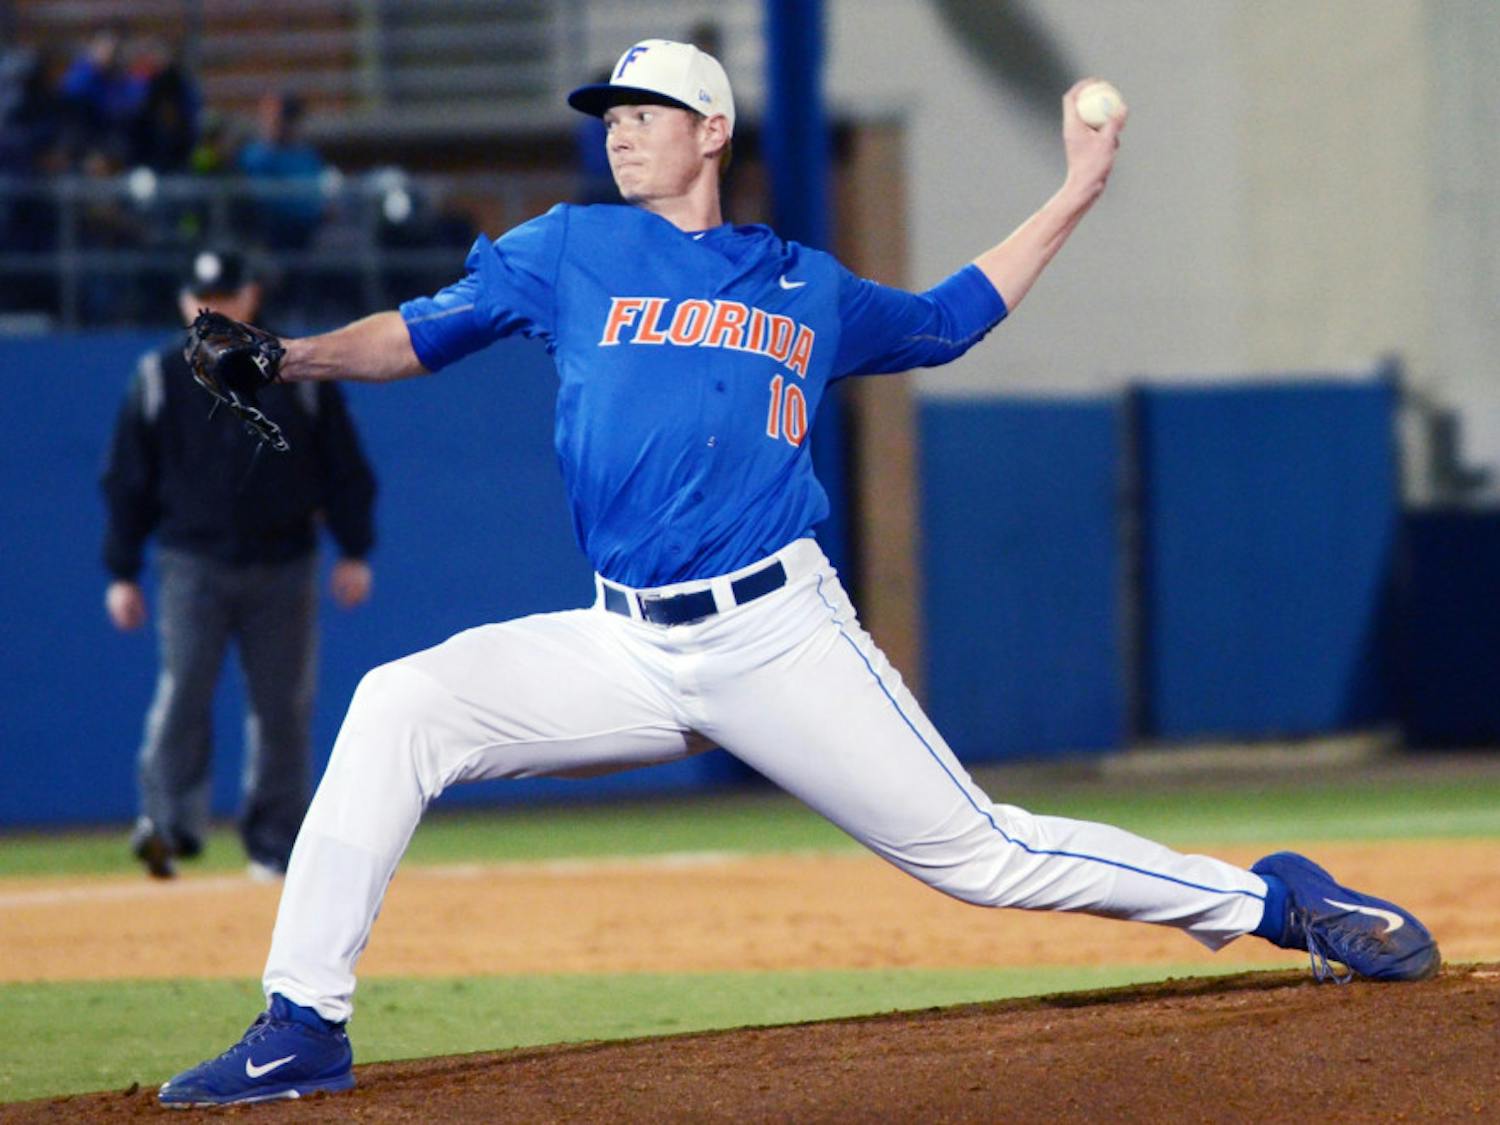 A.J. Puk pitches during Florida's 7-2 loss to Miami on Feb. 21 at McKethan Stadium.